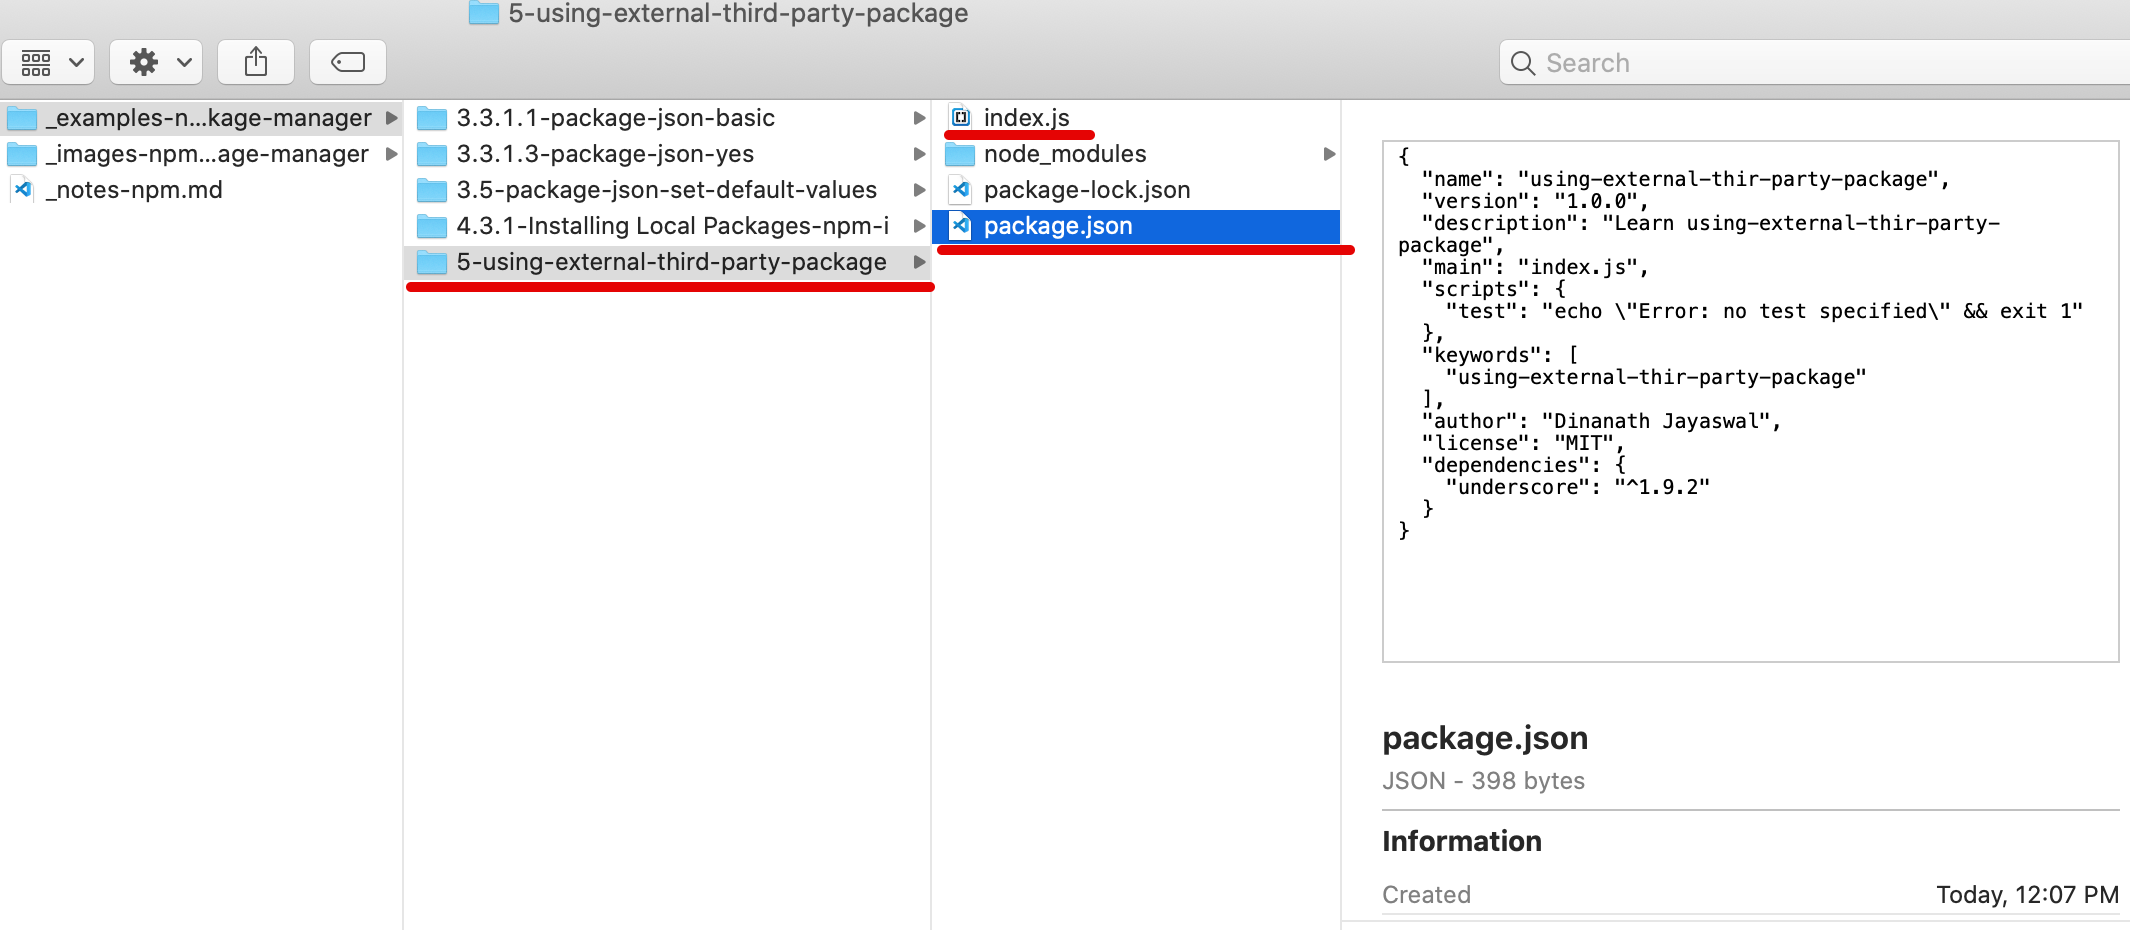 5.1-using-external-third-party-package-folder-structure.png